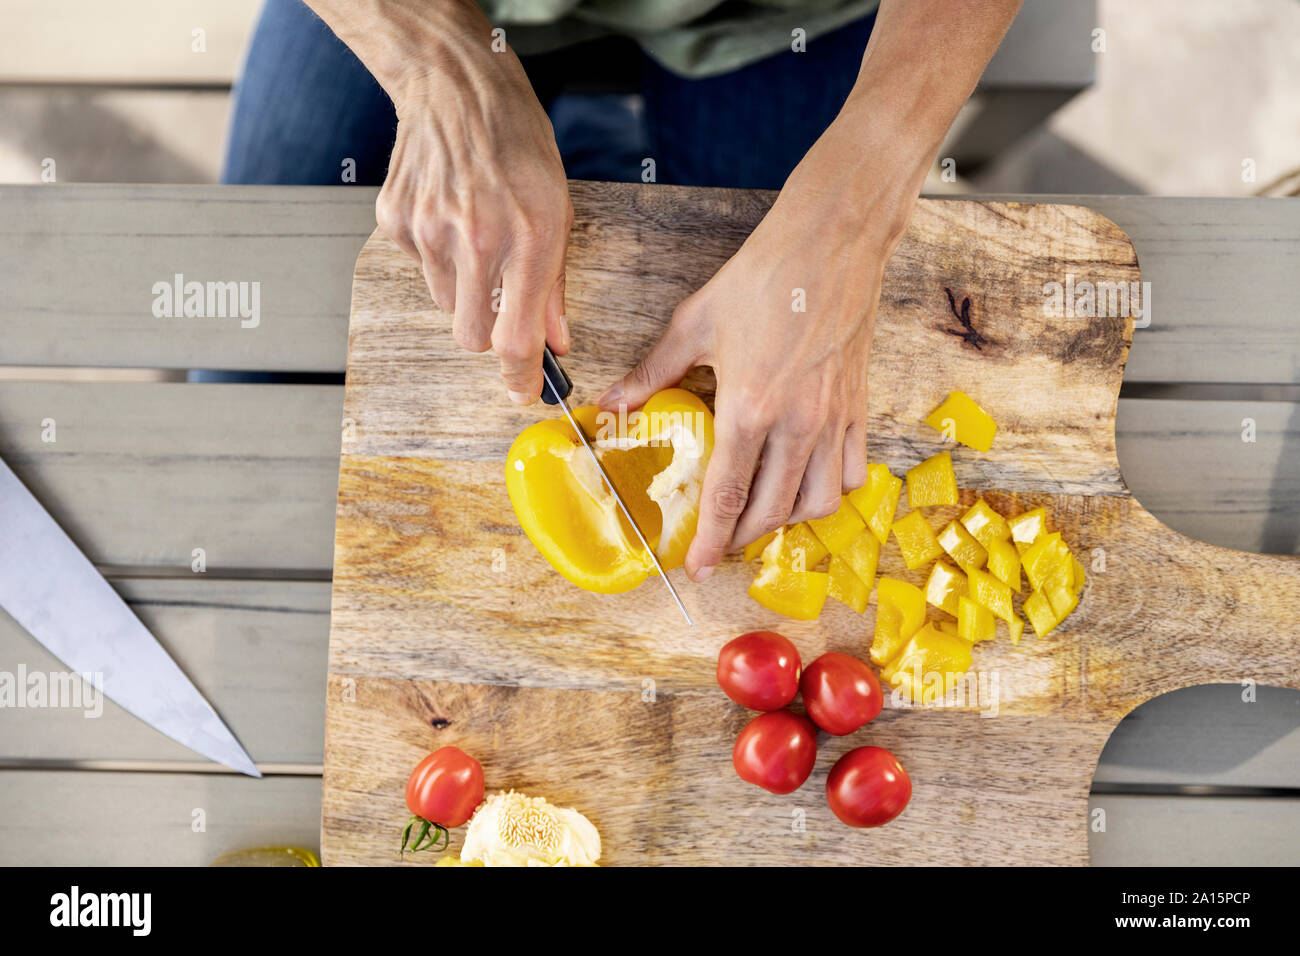 Close-up of woman preparing healthy food outdoors Stock Photo